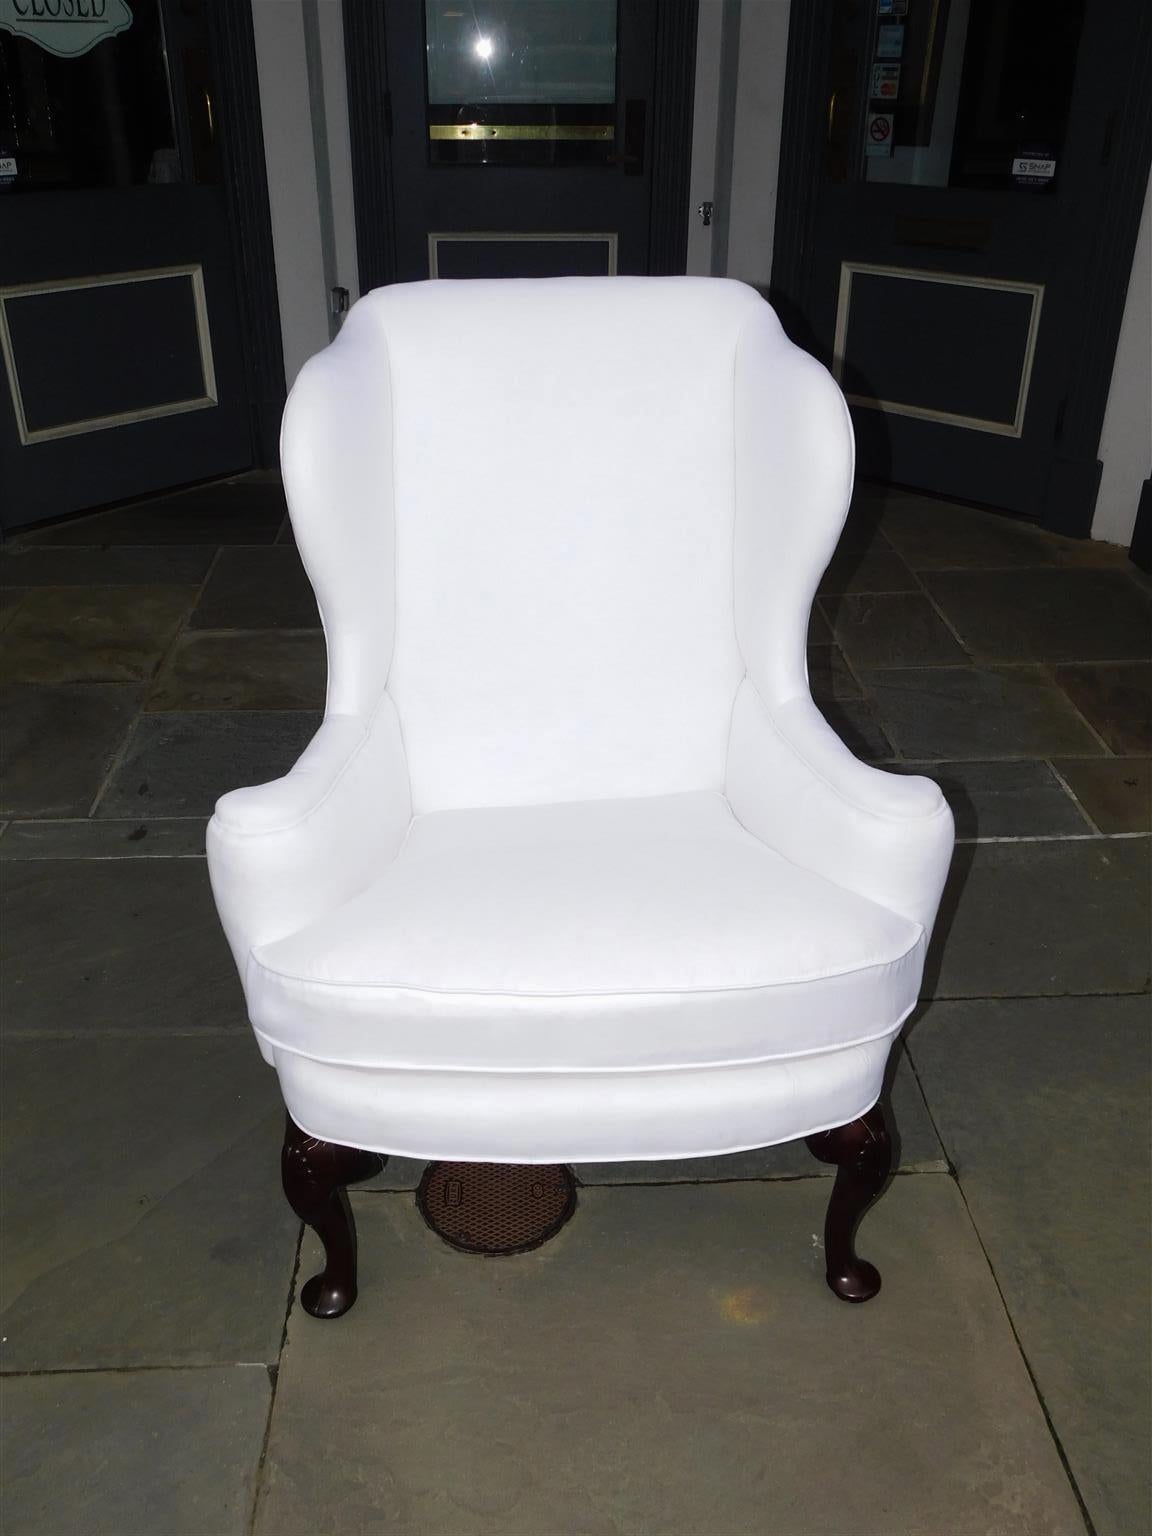 English Queen Anne Mahogany upholstered wingback chair with flanking flared wings, flanking scrolled arms, carved shell knees, and resting on the original pad feet with rear squared tapered legs. Mid-18th century. wingback chair is upholstered in